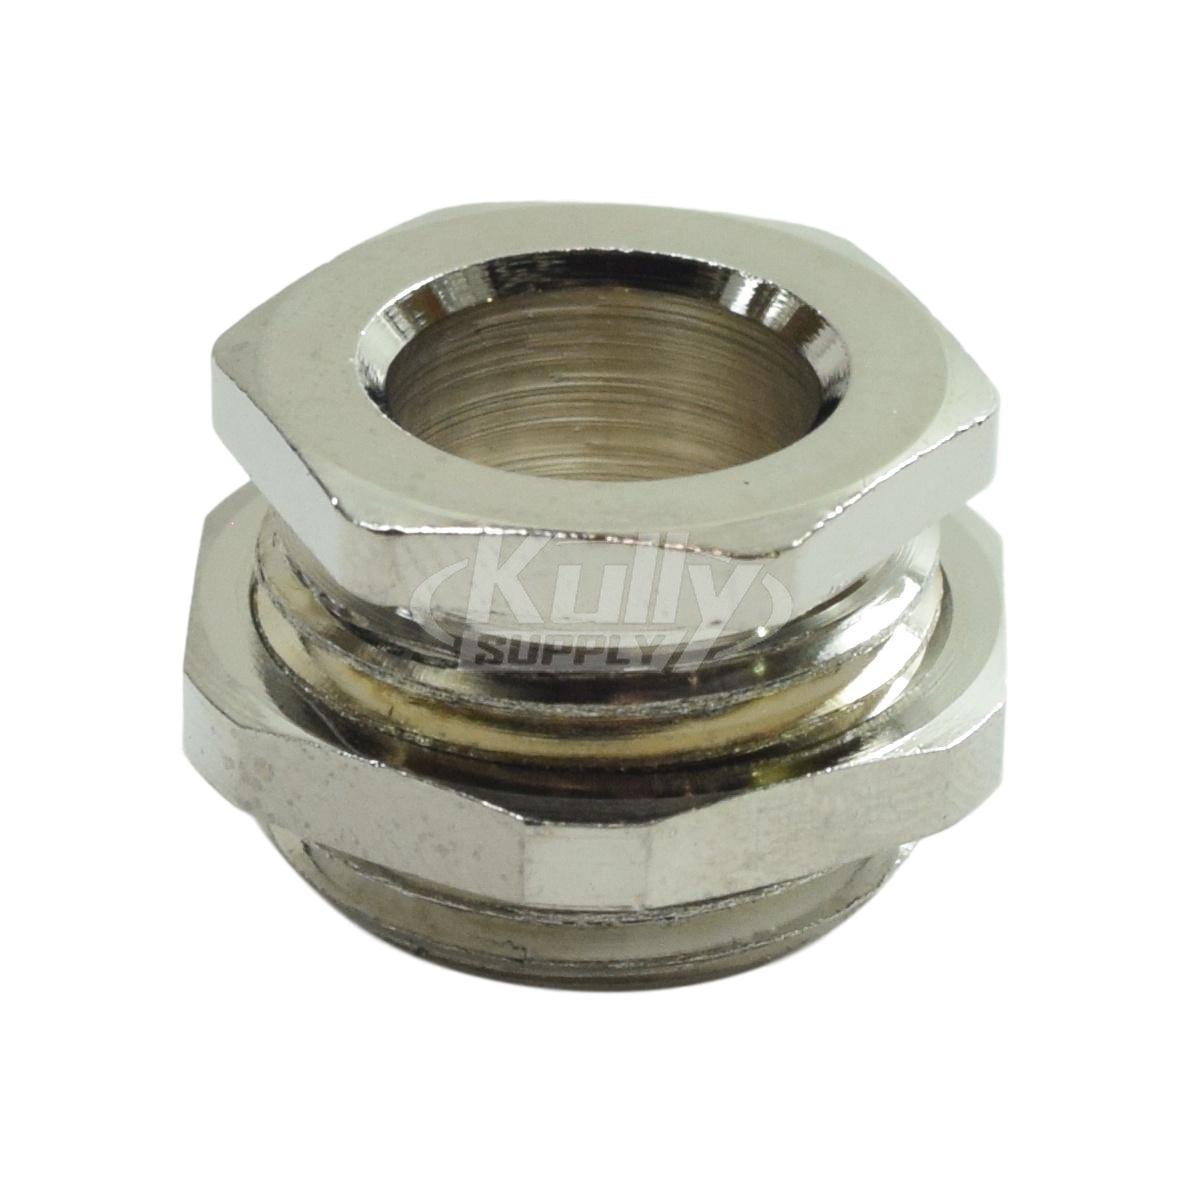 T&S Brass 009002-25 B-850 Packing/Lock Nut Assembly